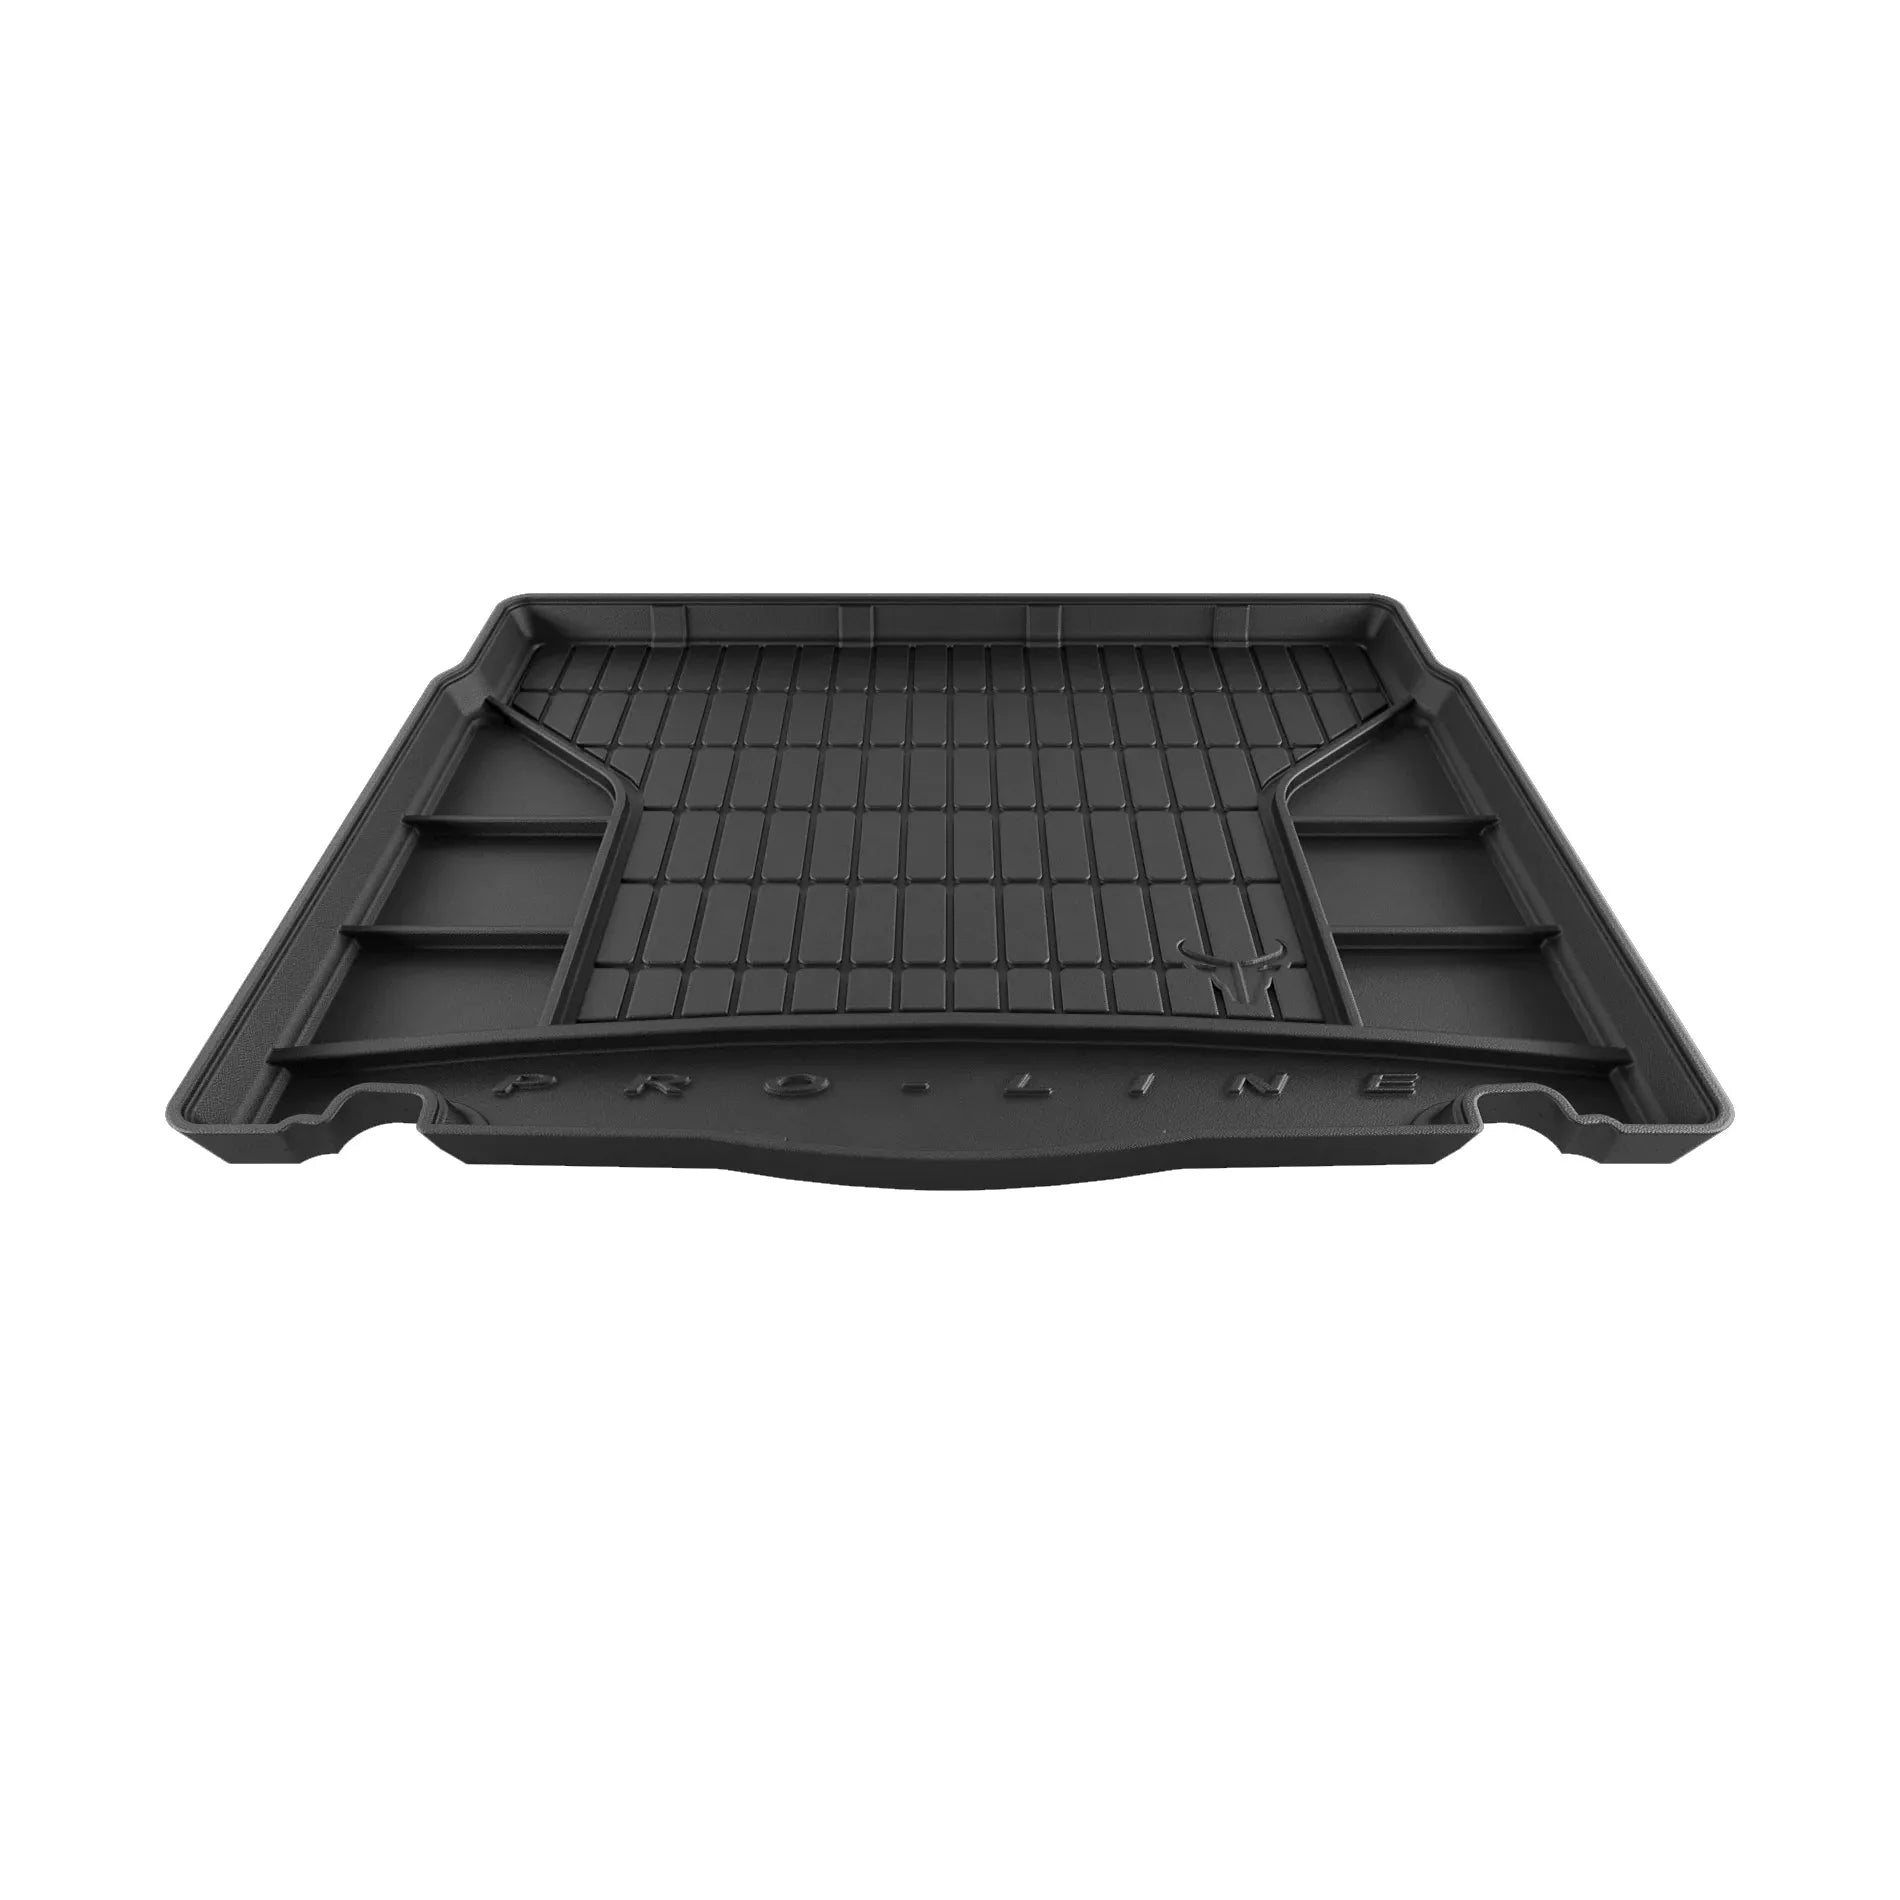 Tailored Car Boot Liner for Vauxhall - Protect Your Boot from Dirt and Damage - Green Flag vGroup